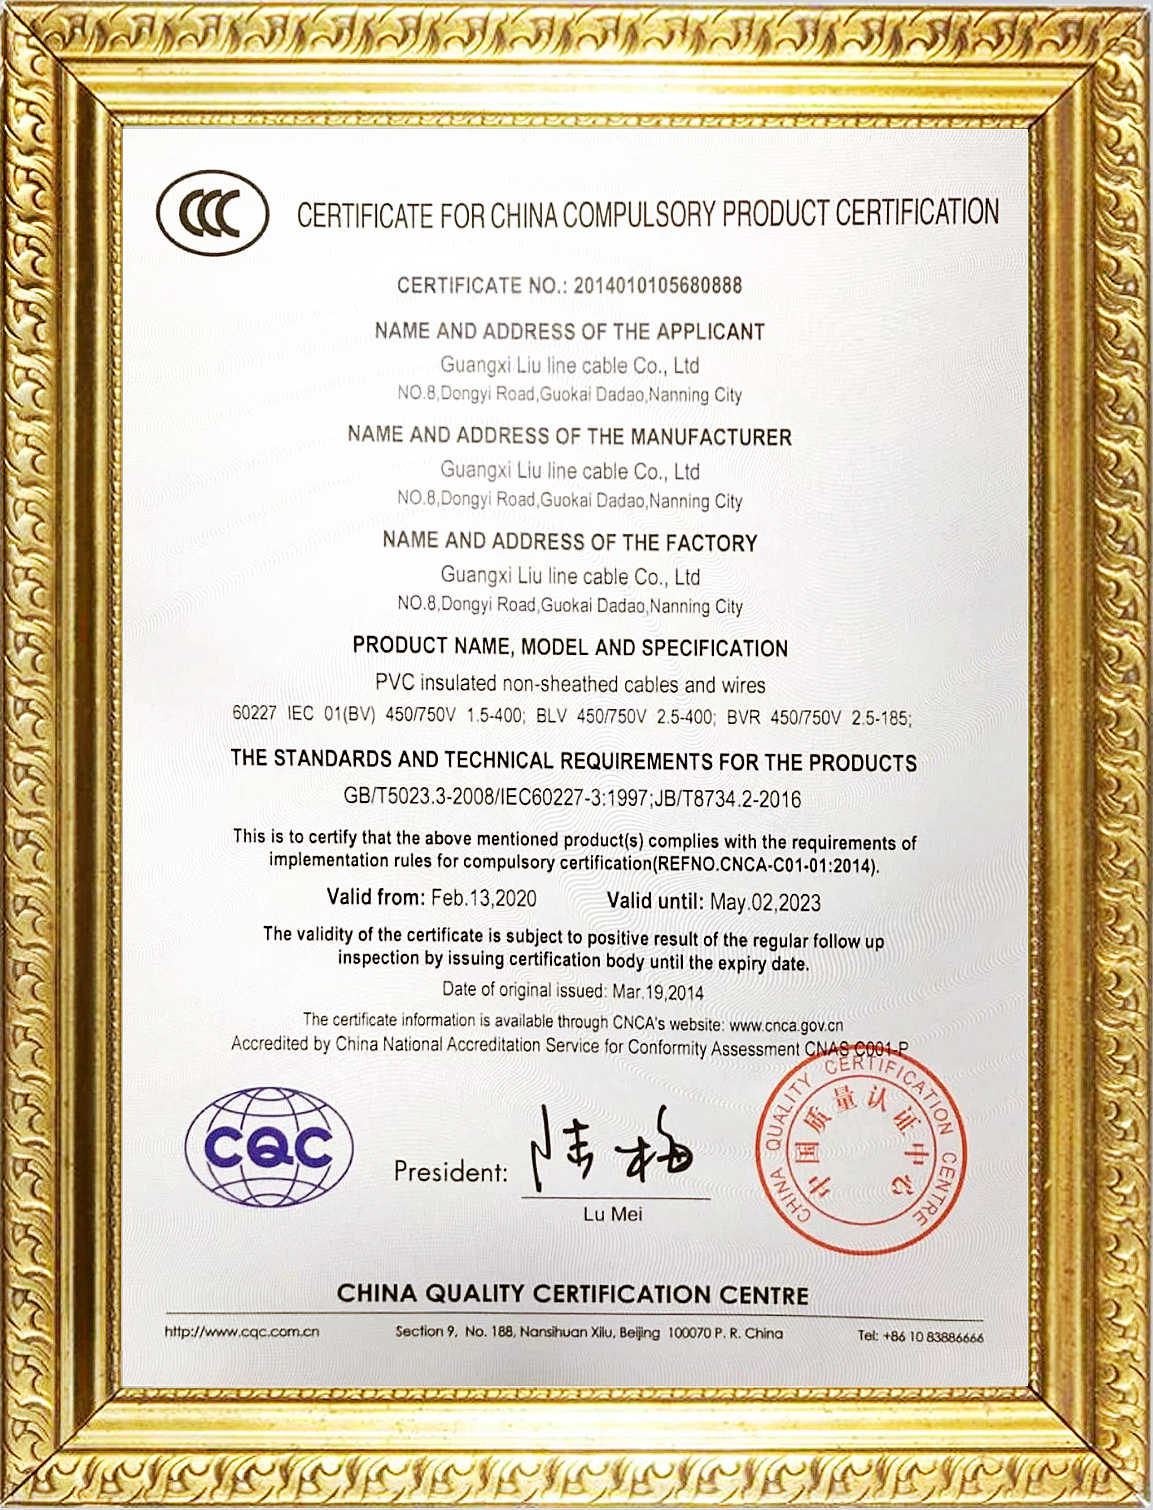 Certificate for china compulsory product certification：PVC insulated non-sheathed cables and wires